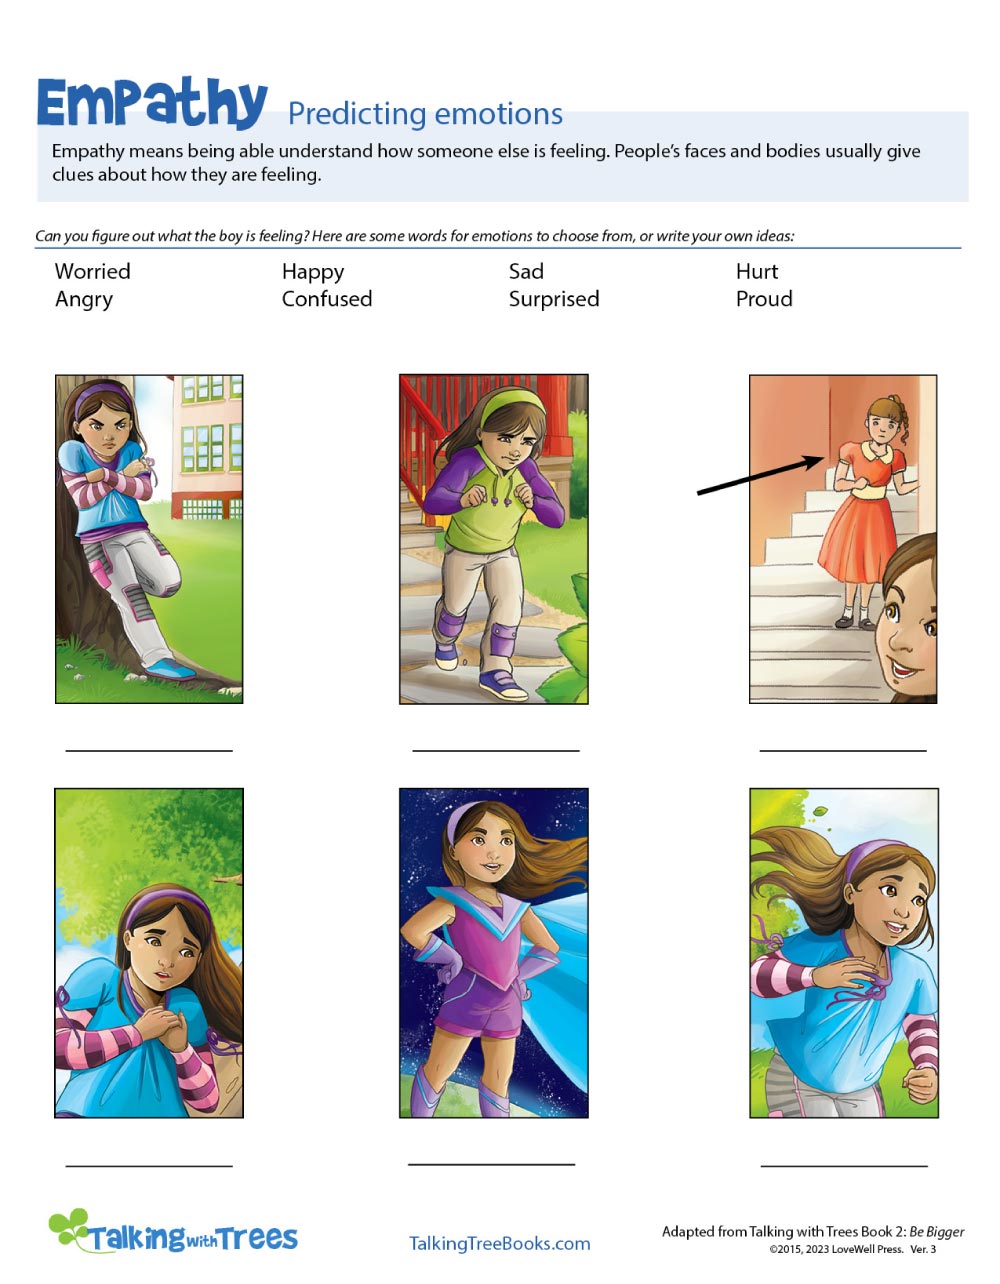 Empathy Worksheet on Predicting Emotions with Characters from Be Bigger